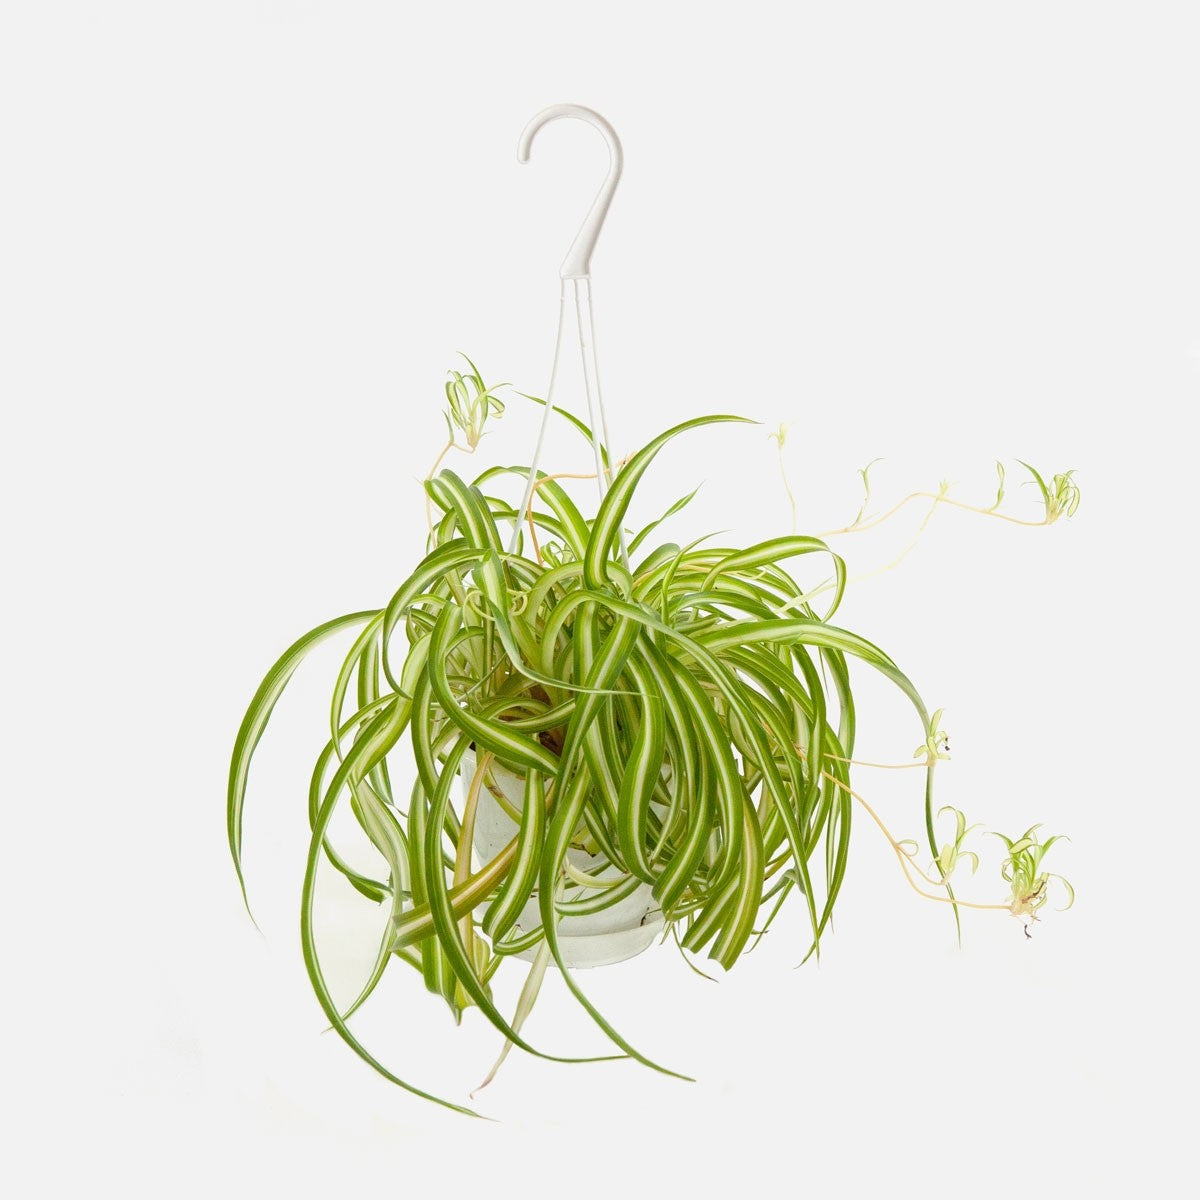 Spider Plant "Bonnie" - 4" Hanging Container